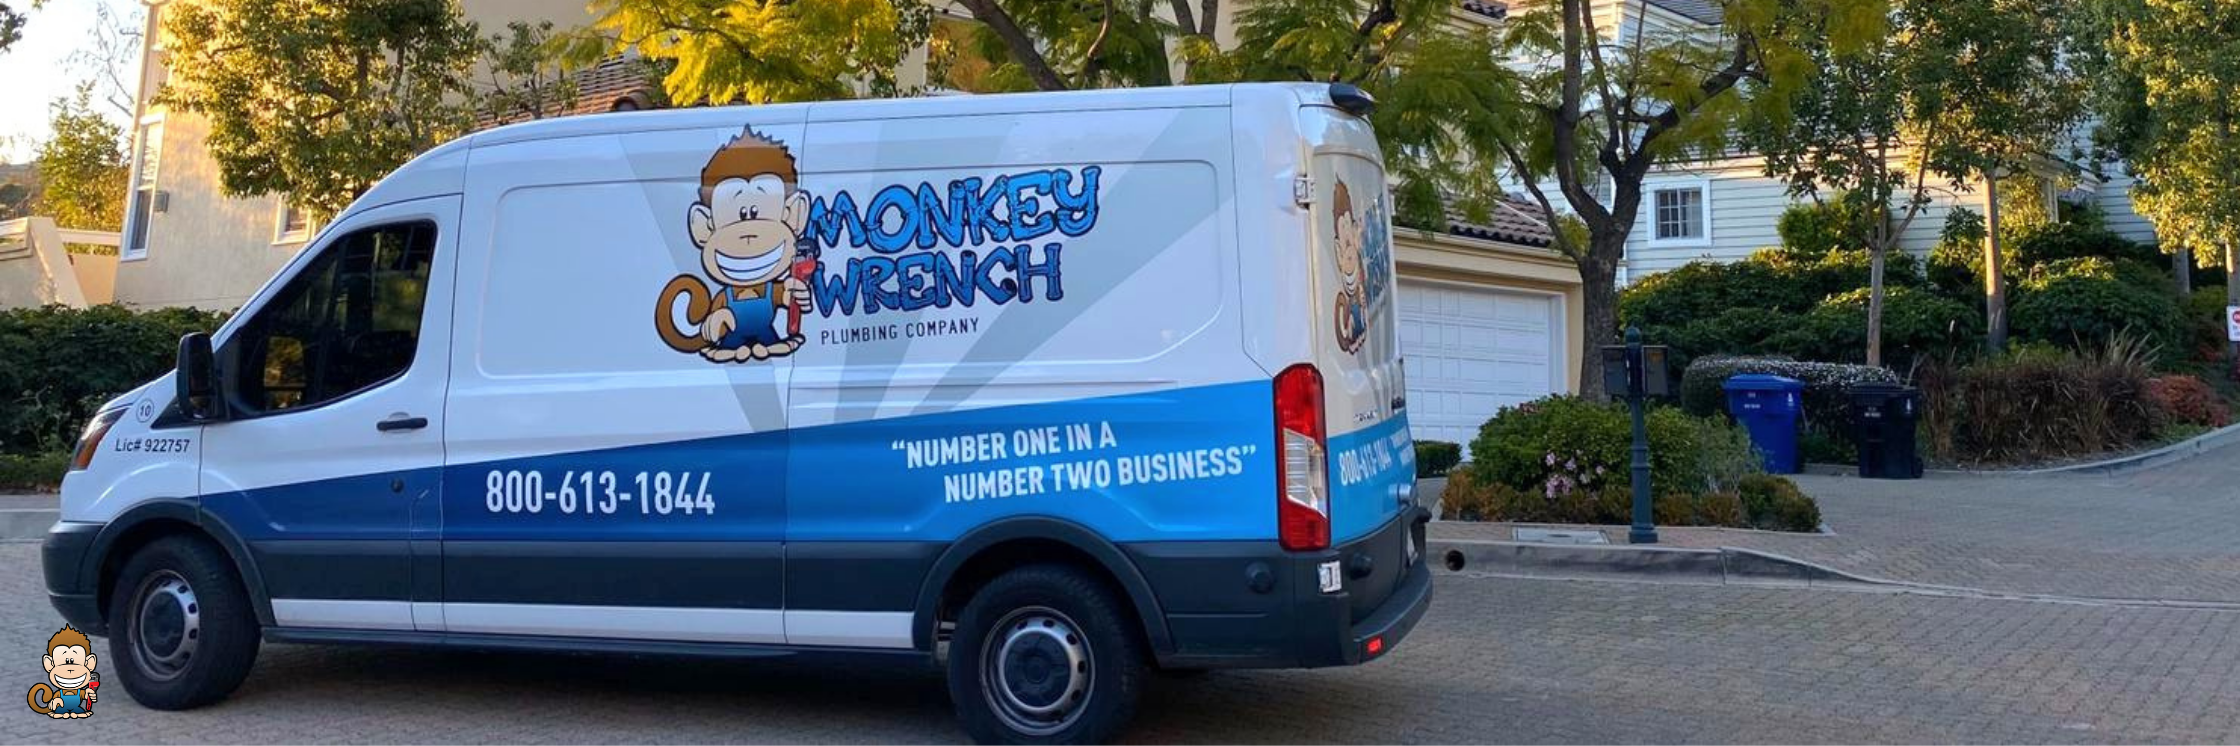 6 Steps to Expect During Your Monkey Wrench Plumbing Appointment